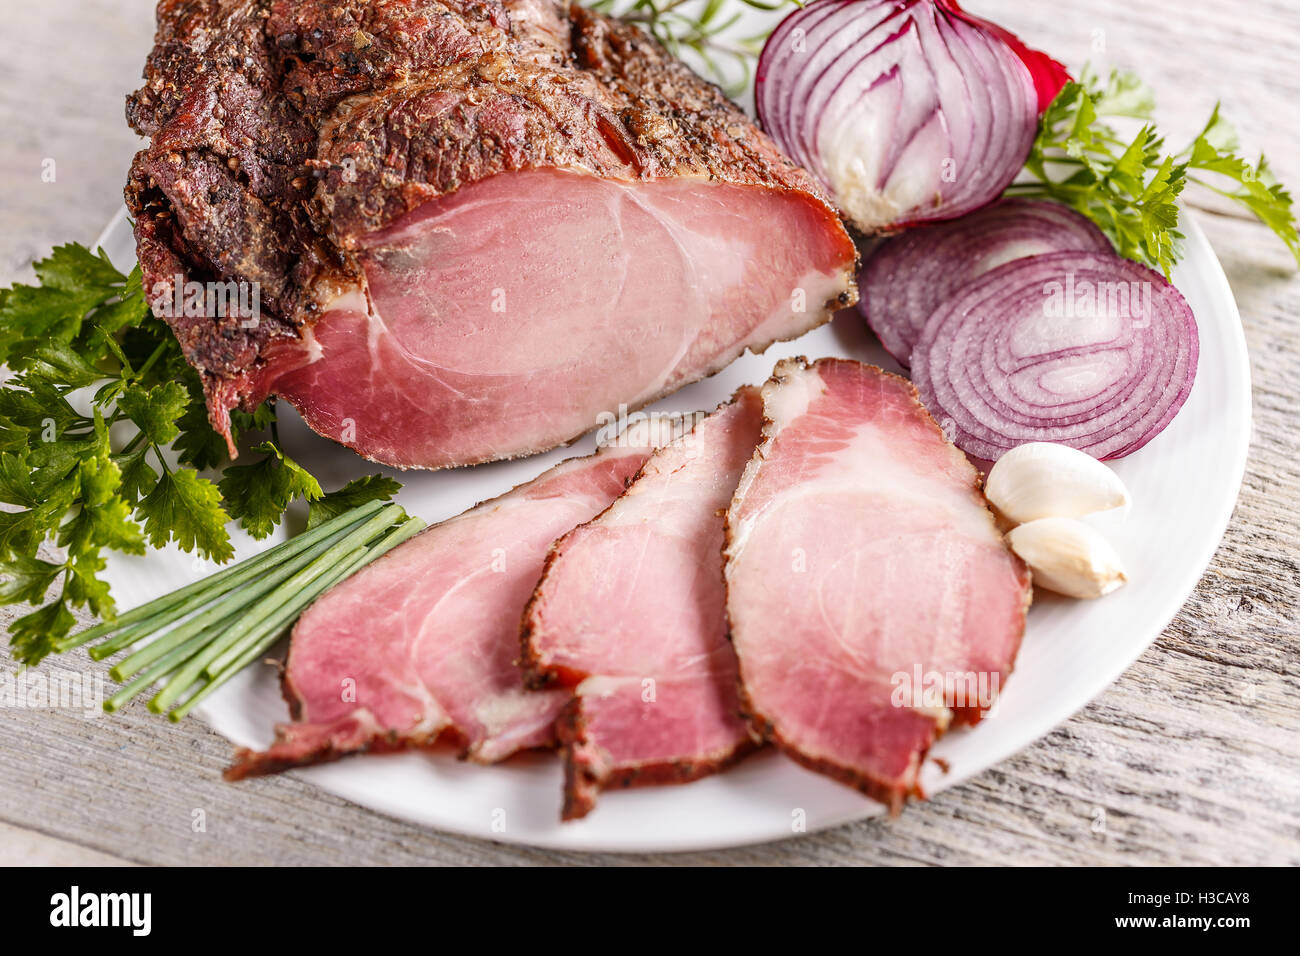 Smoked pork loin with spices on white plate Stock Photo